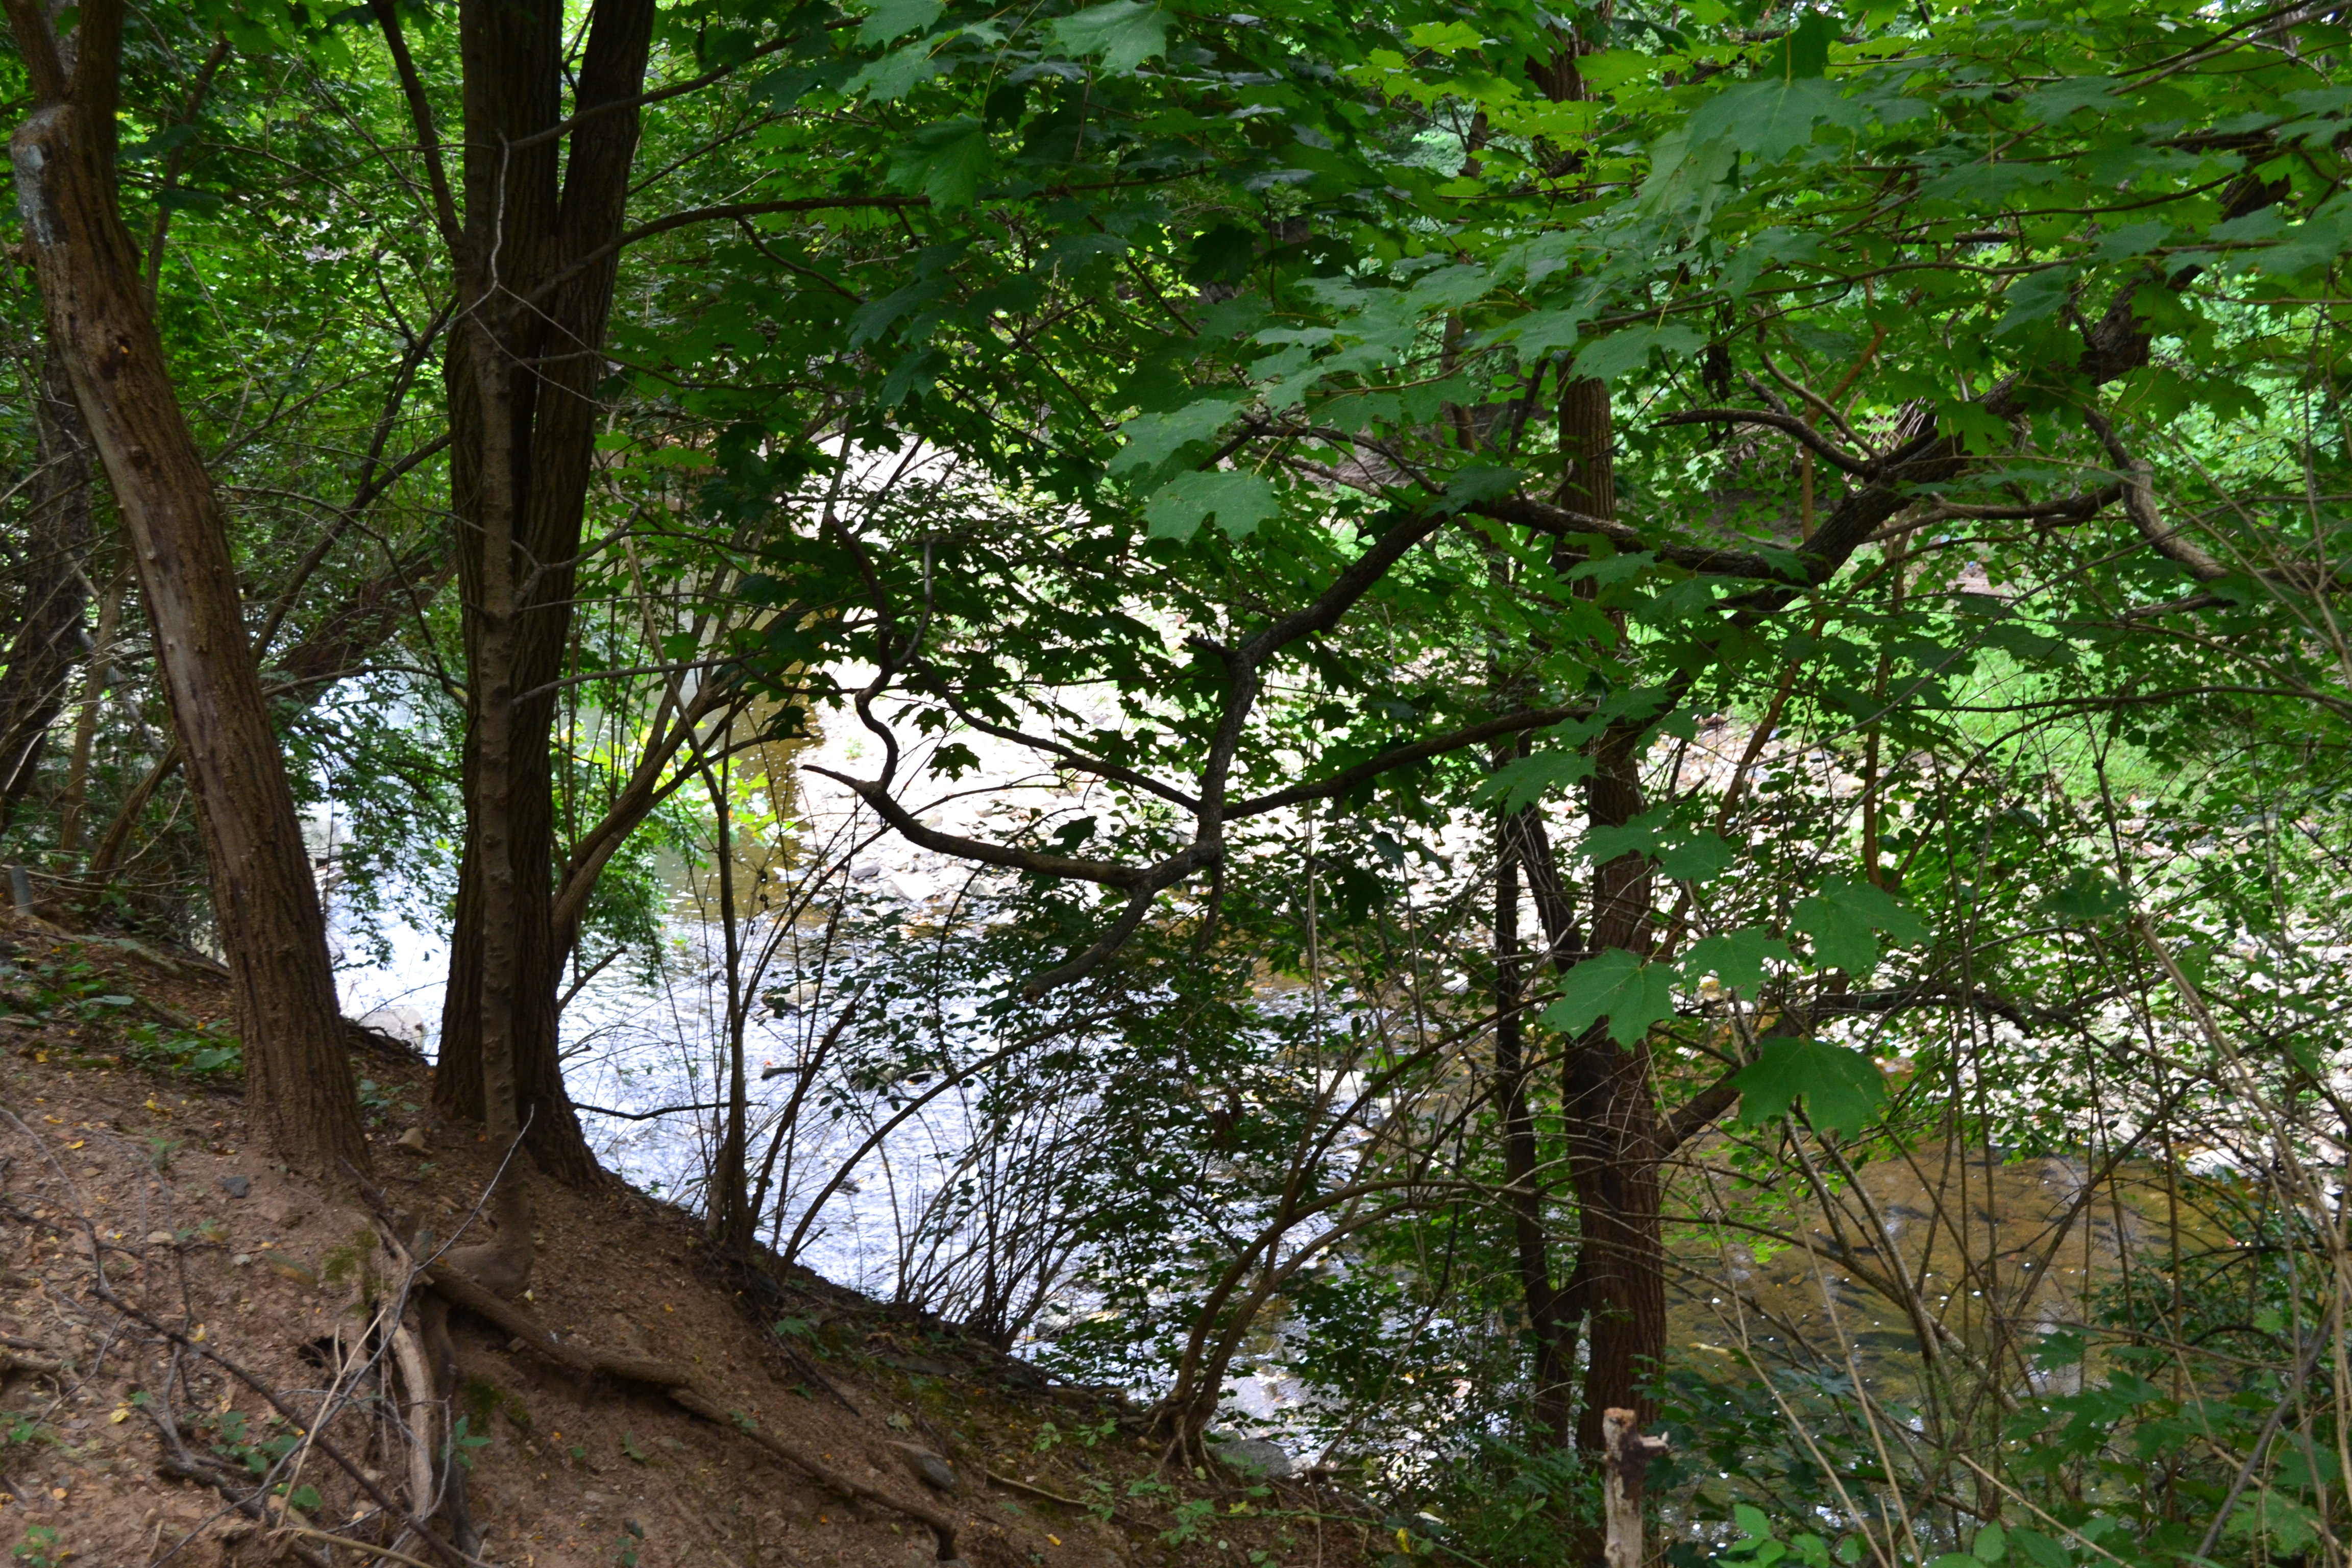 The off-road trails offer glimpses of Cobbs Creek 